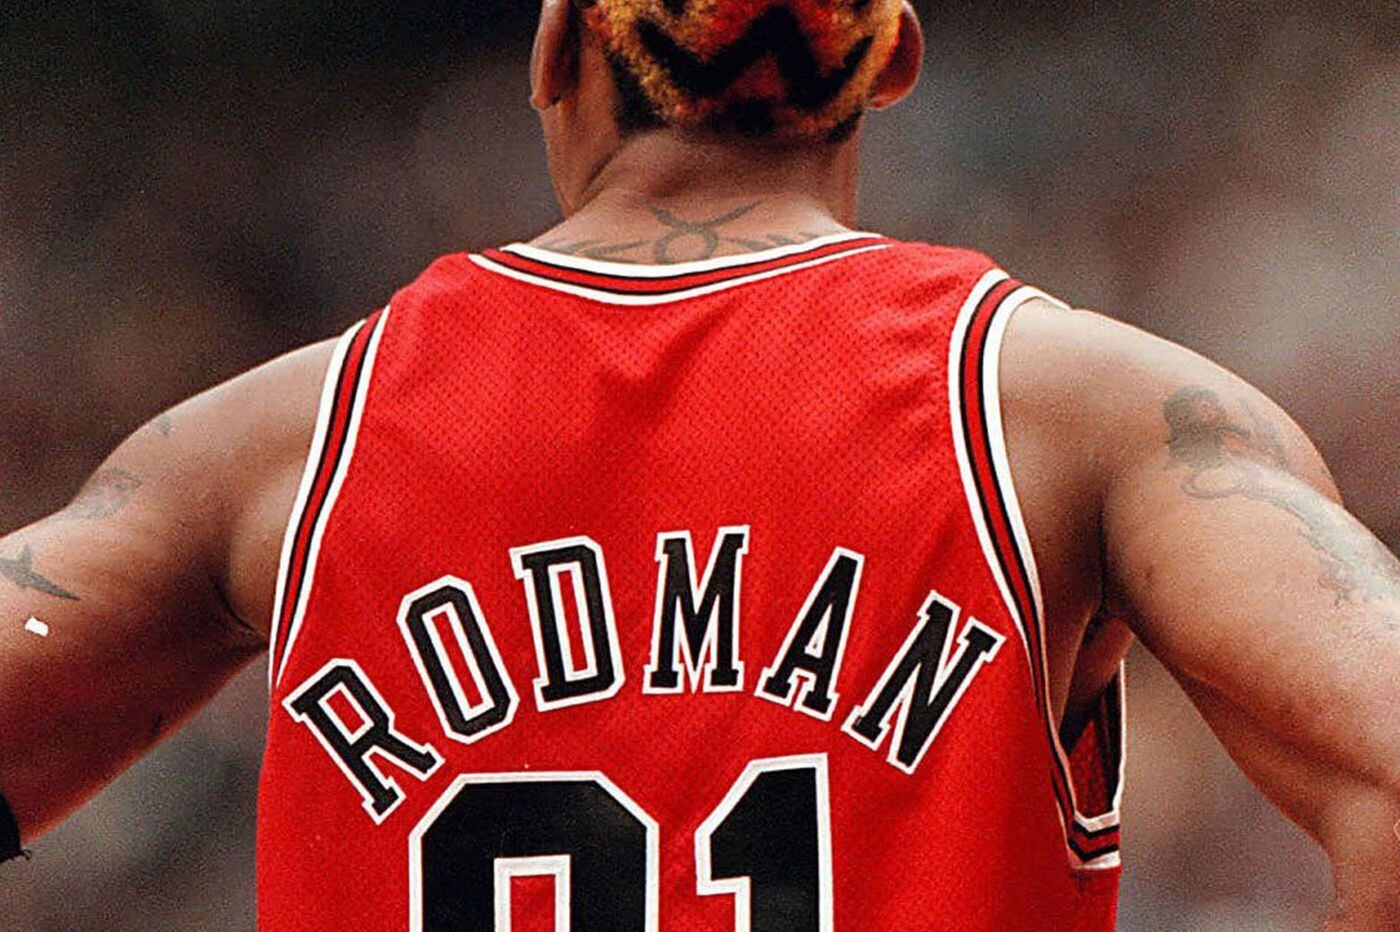 Latest sports news: Last Dance shows Dennis Rodman could have been a social...